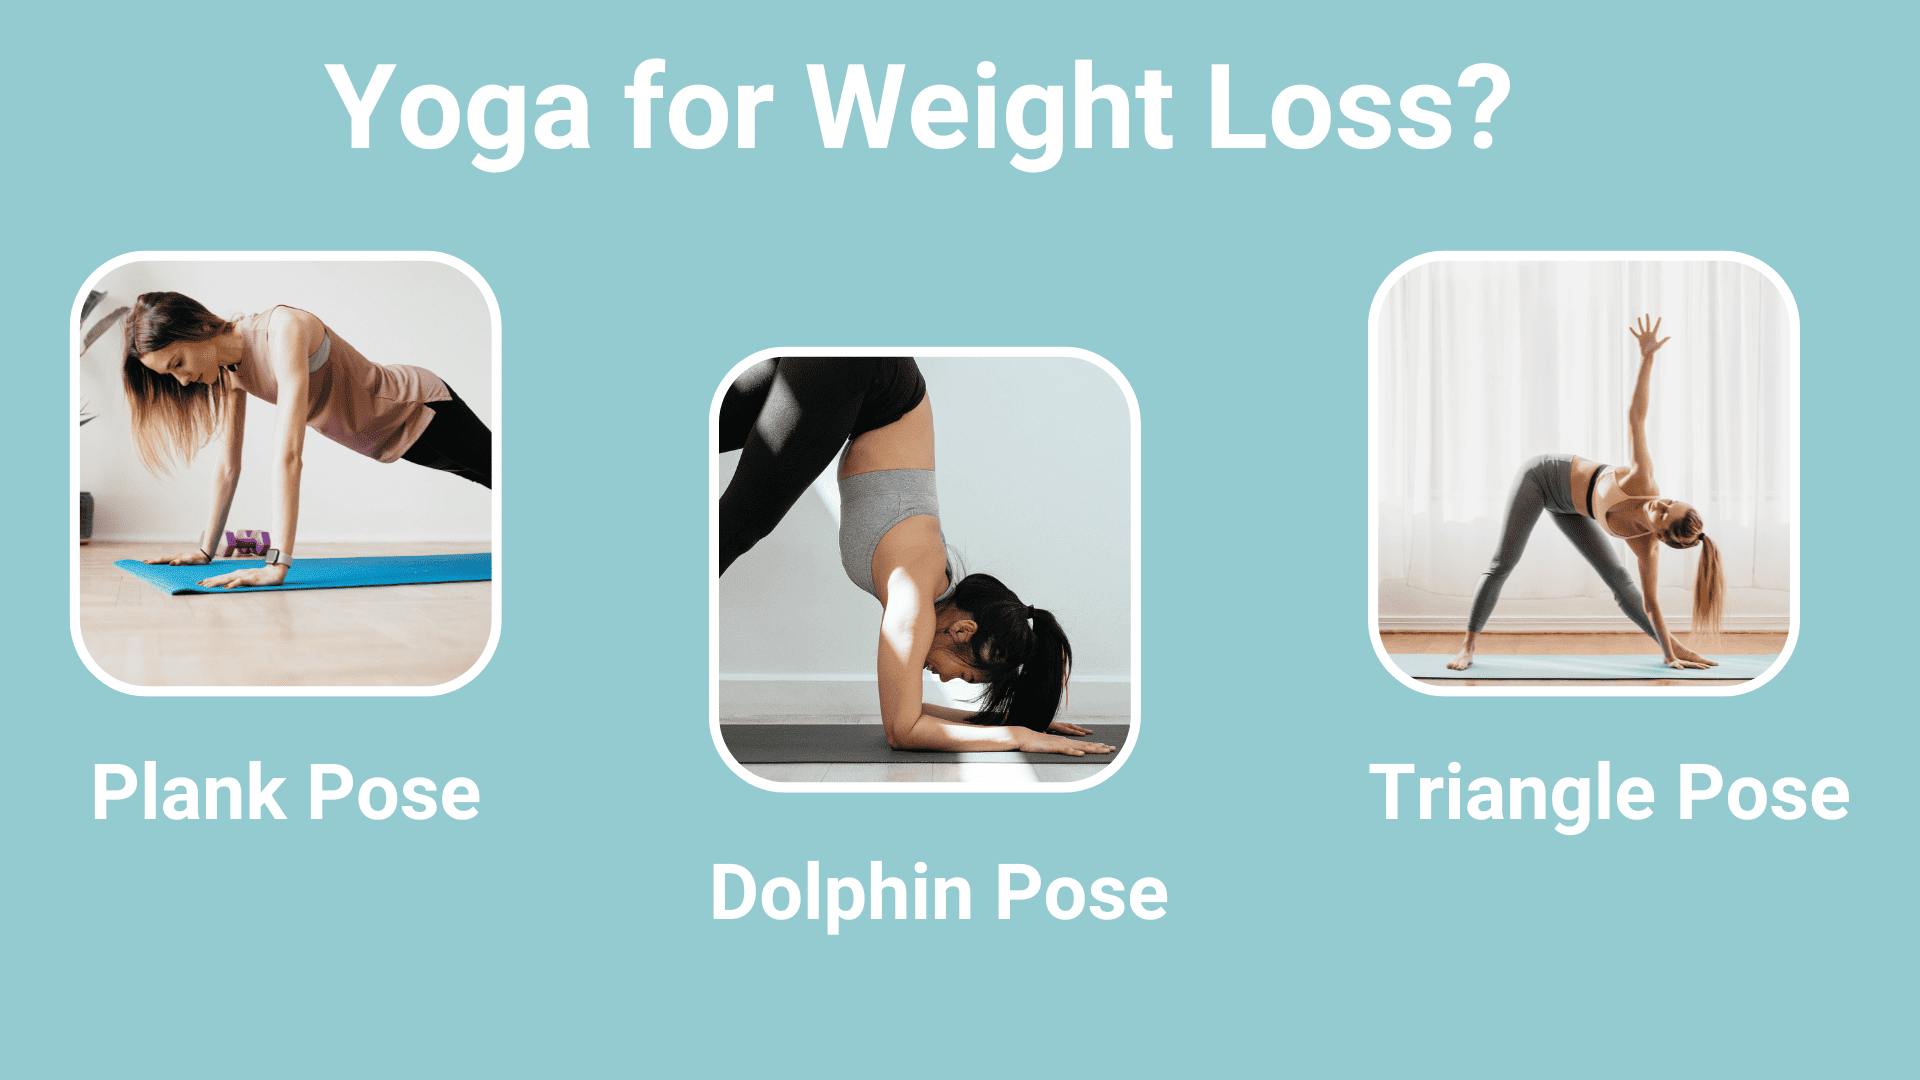 Yoga For Weight Loss: 15 Yoga Asanas for Weight Loss